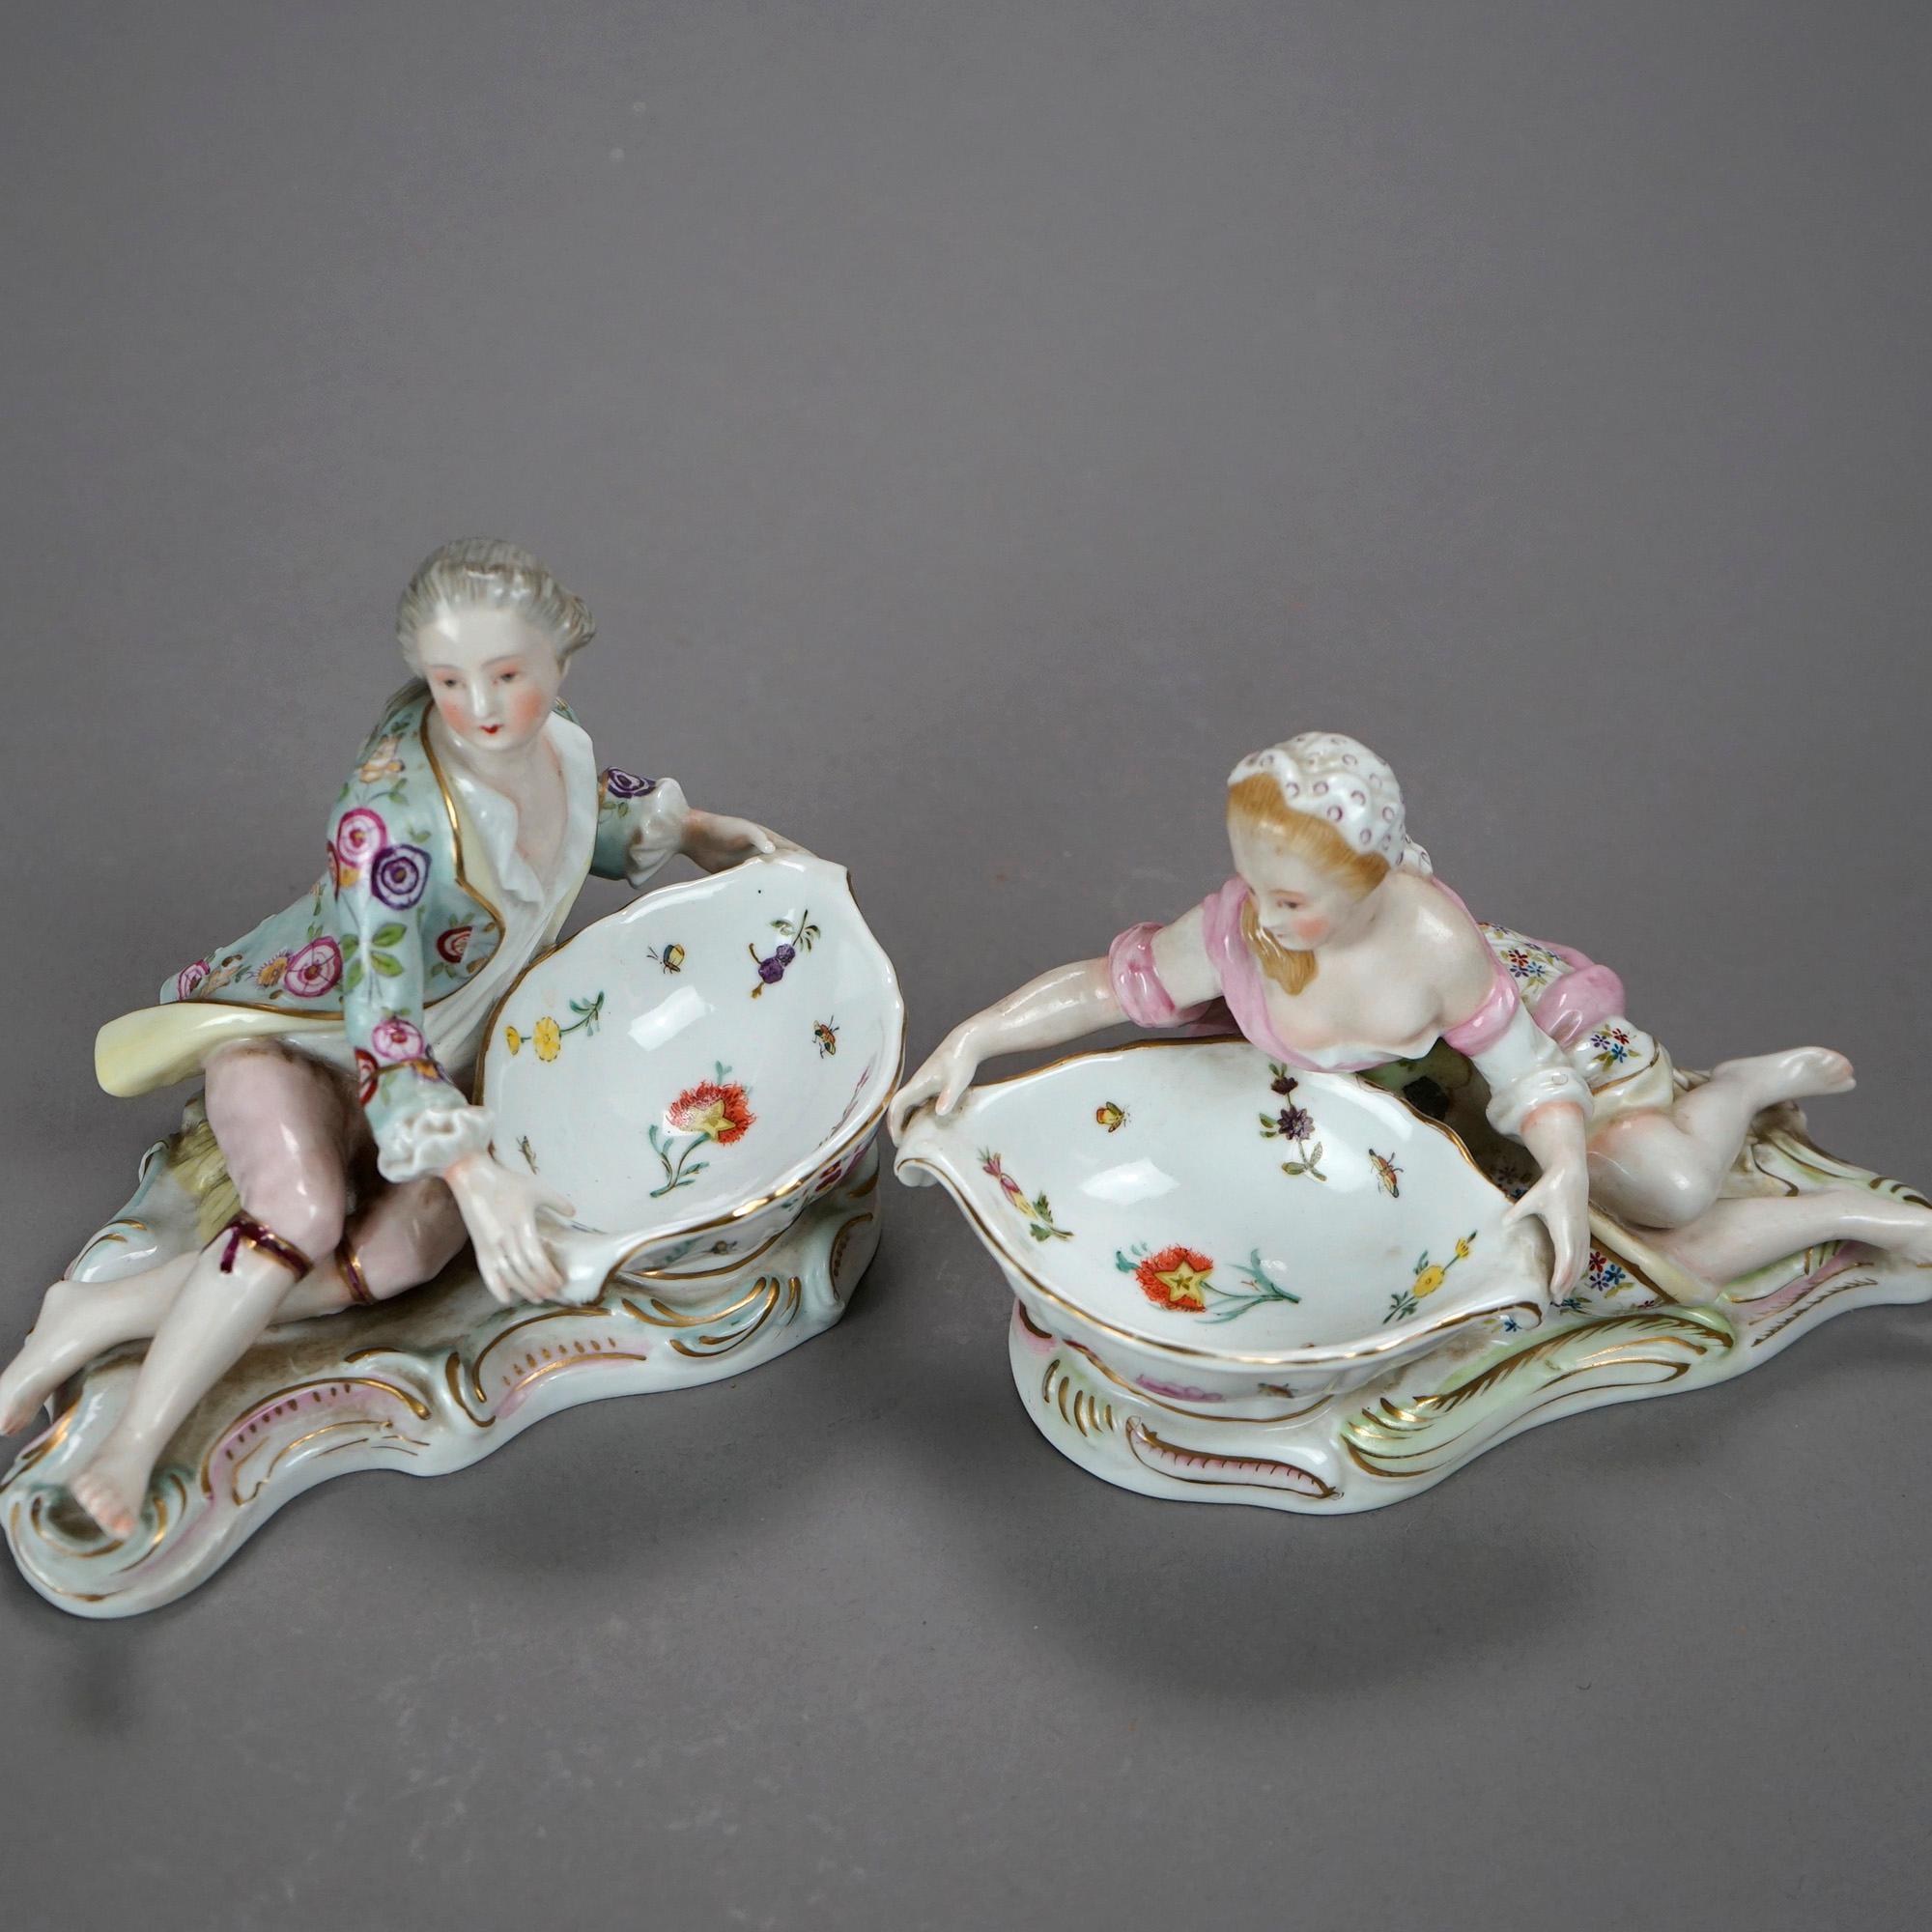 An antique pair of .figural sweet meat dishes in the manner of Meissen offer porcelain construction with hand painted and gilt figures of a woman and man, floral highlights throughout, maker mark on bases as photographed, c1900

Measures- 4.5''H x